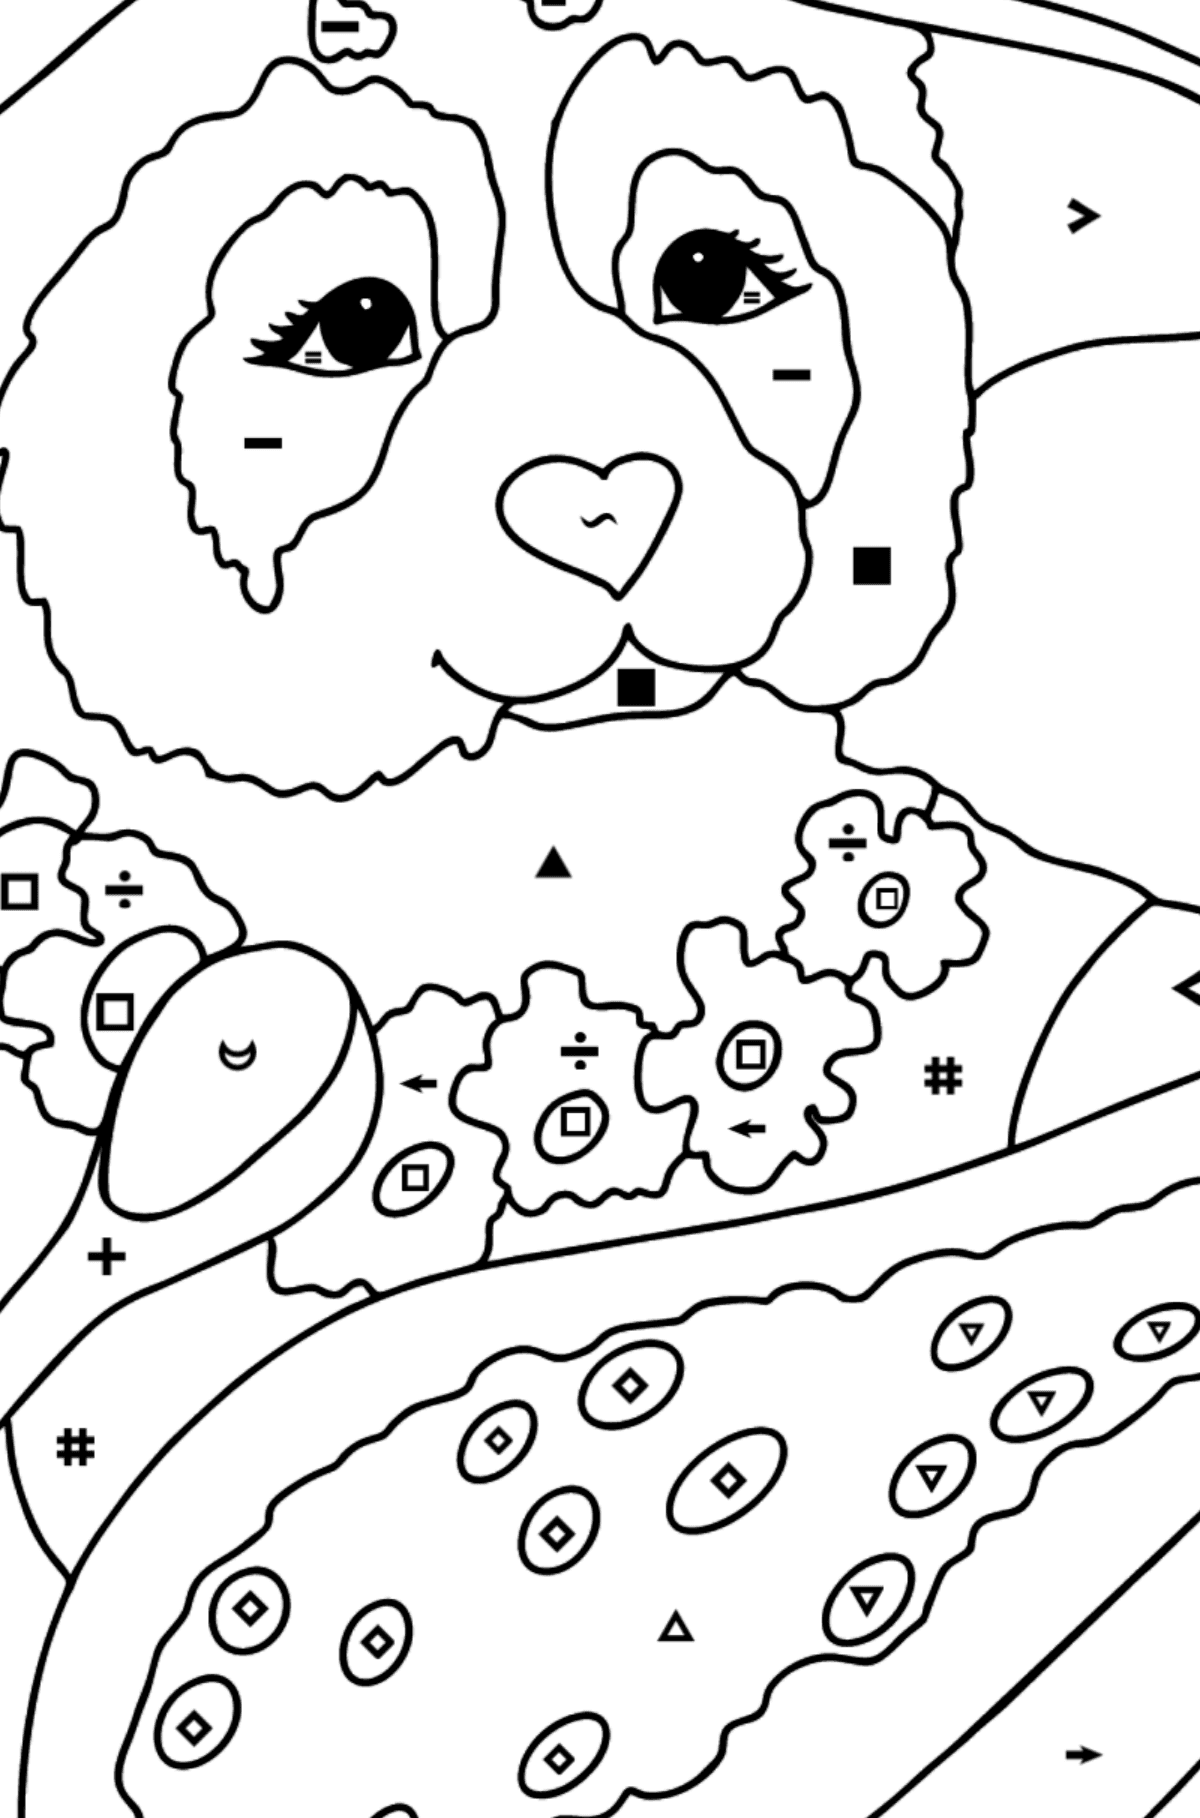 Cute Panda (Difficult) coloring page - Coloring by Symbols for Kids